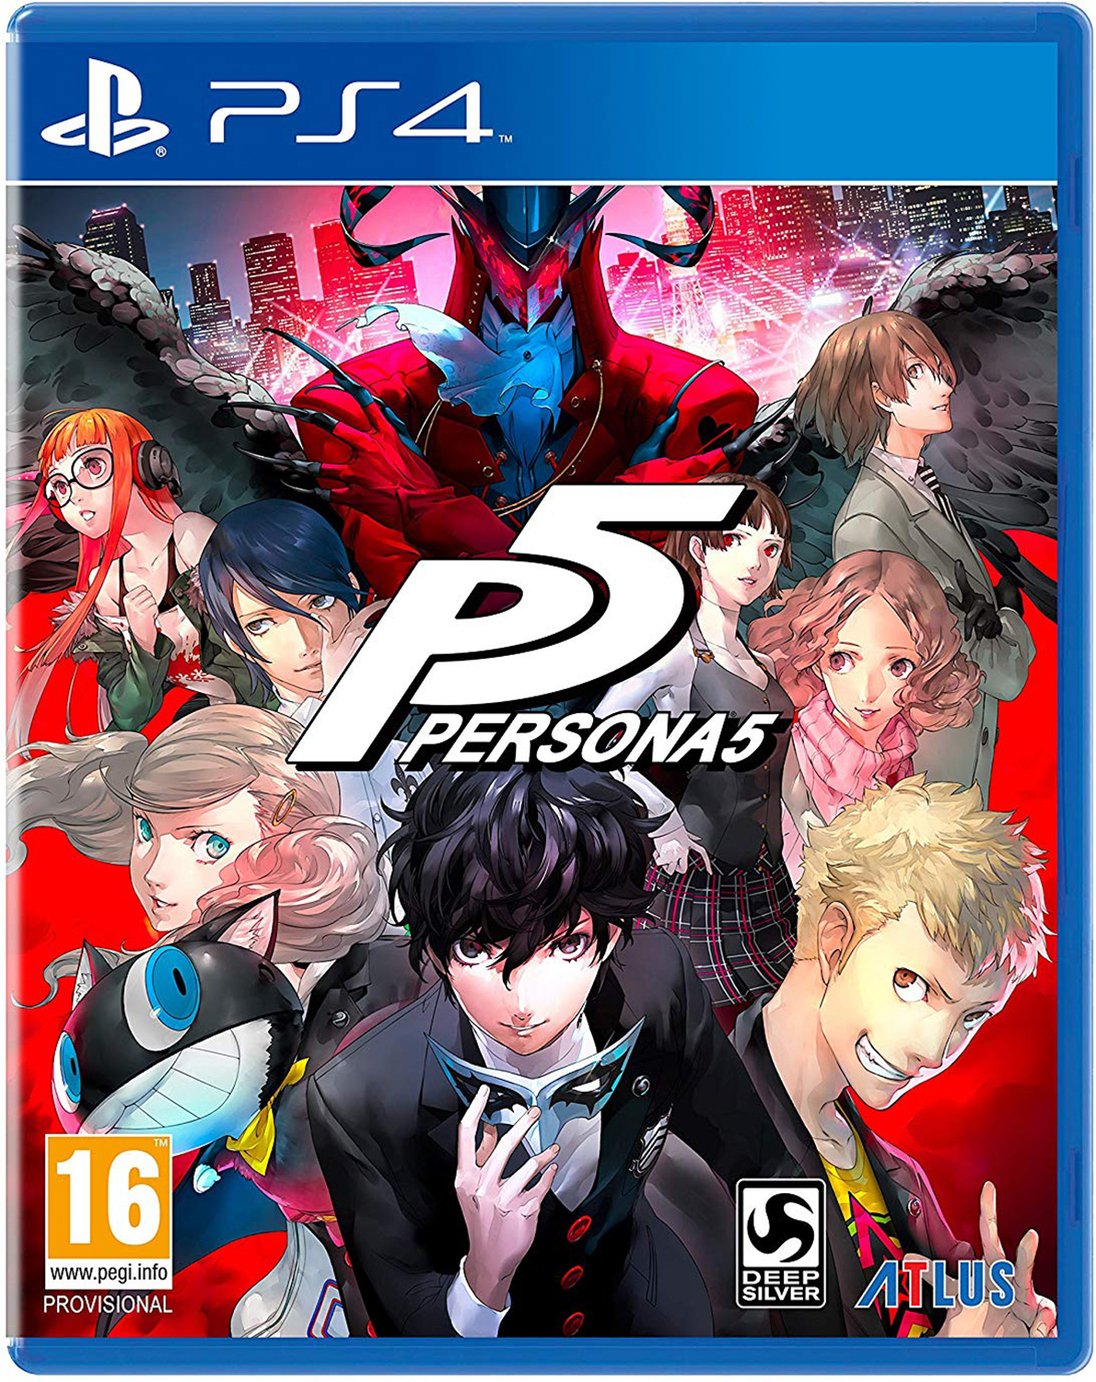 Persona 5 PS4 Game